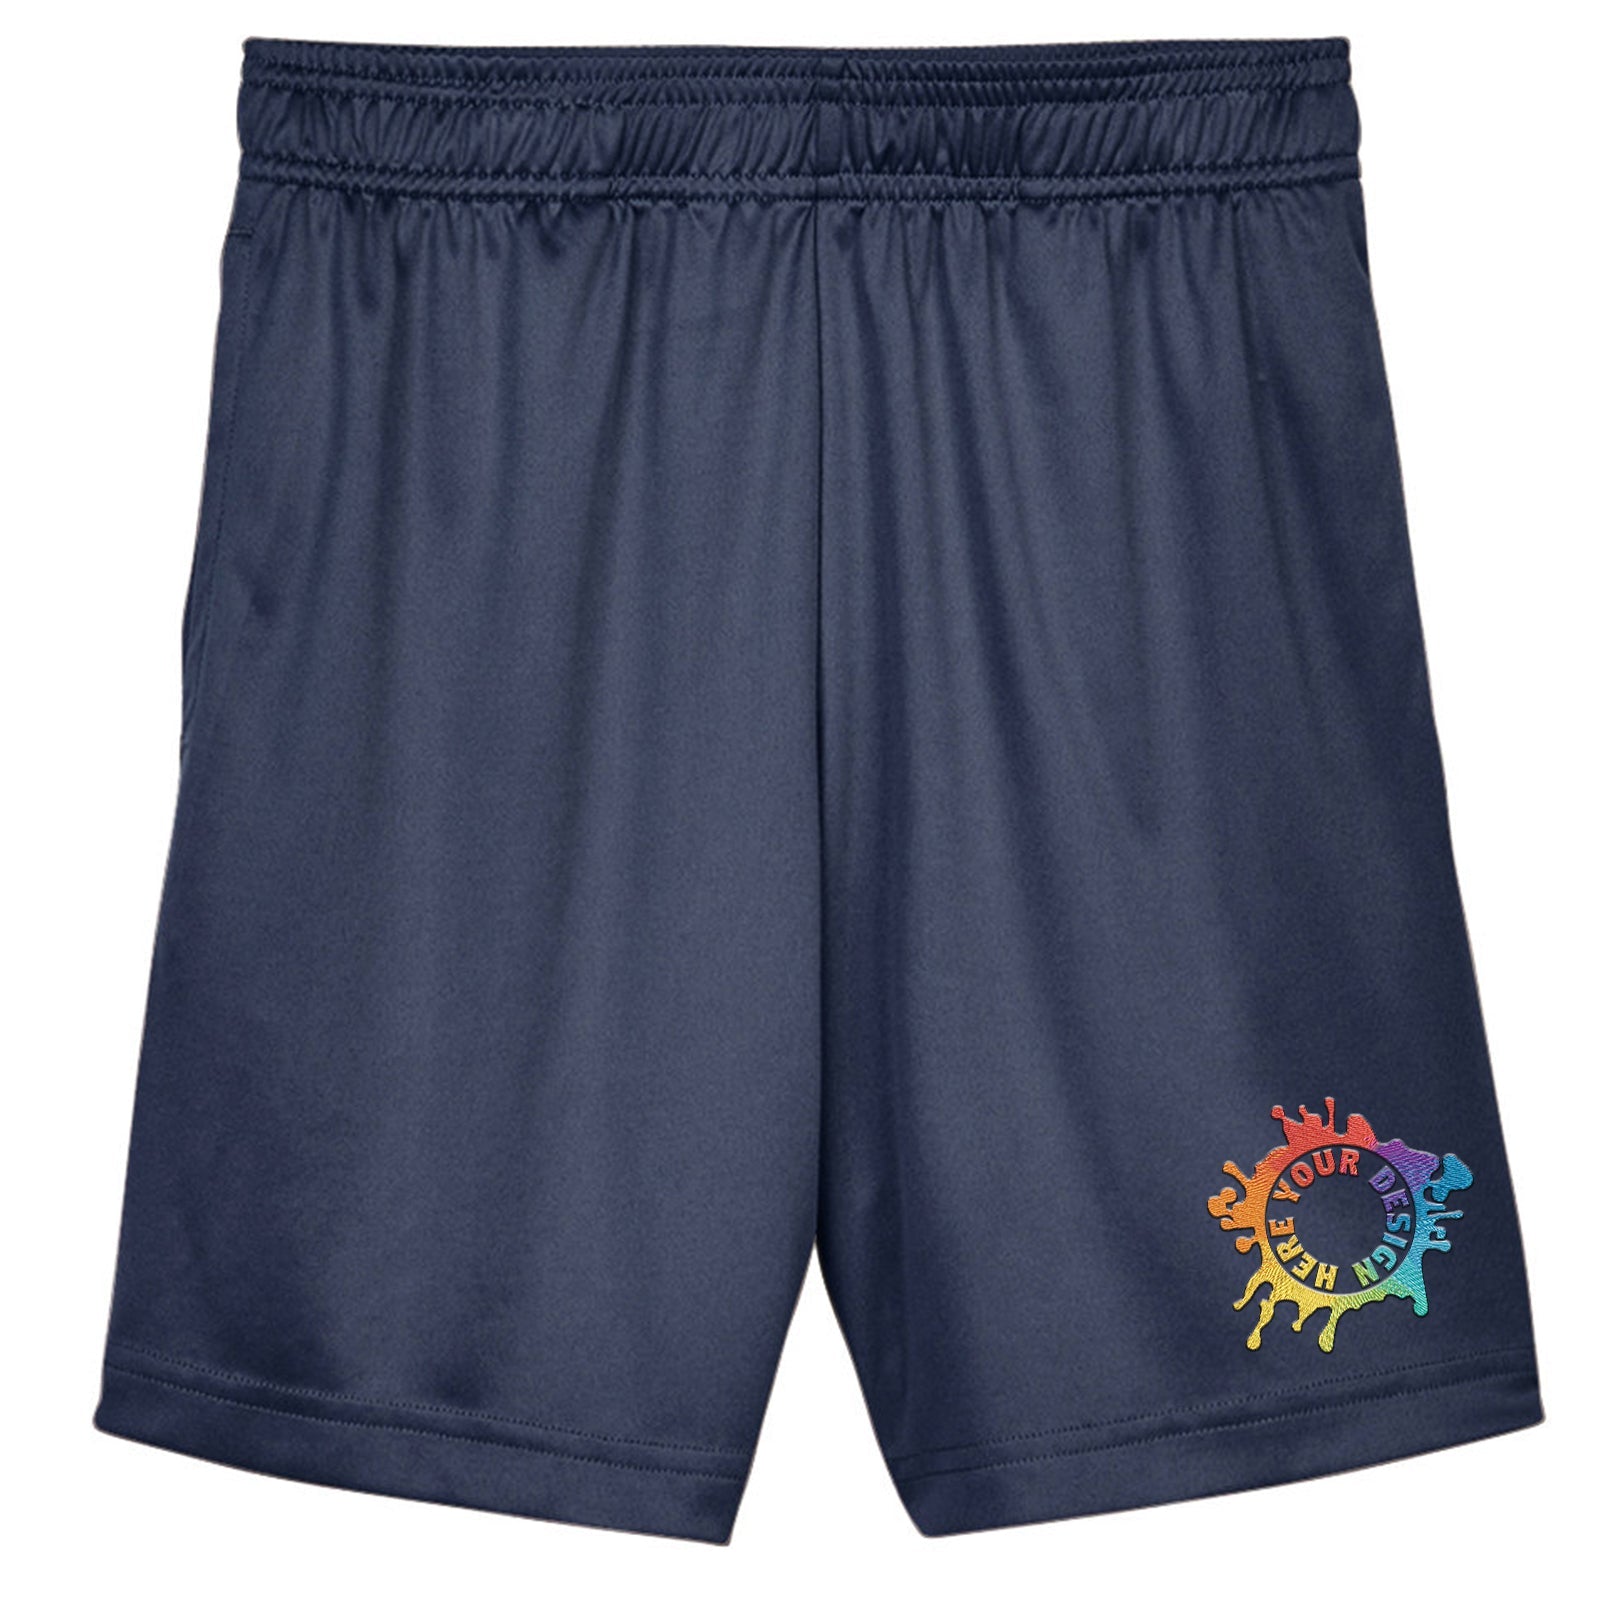 Team 365 Youth Zone Performance Shorts Embroidery - Mato & Hash